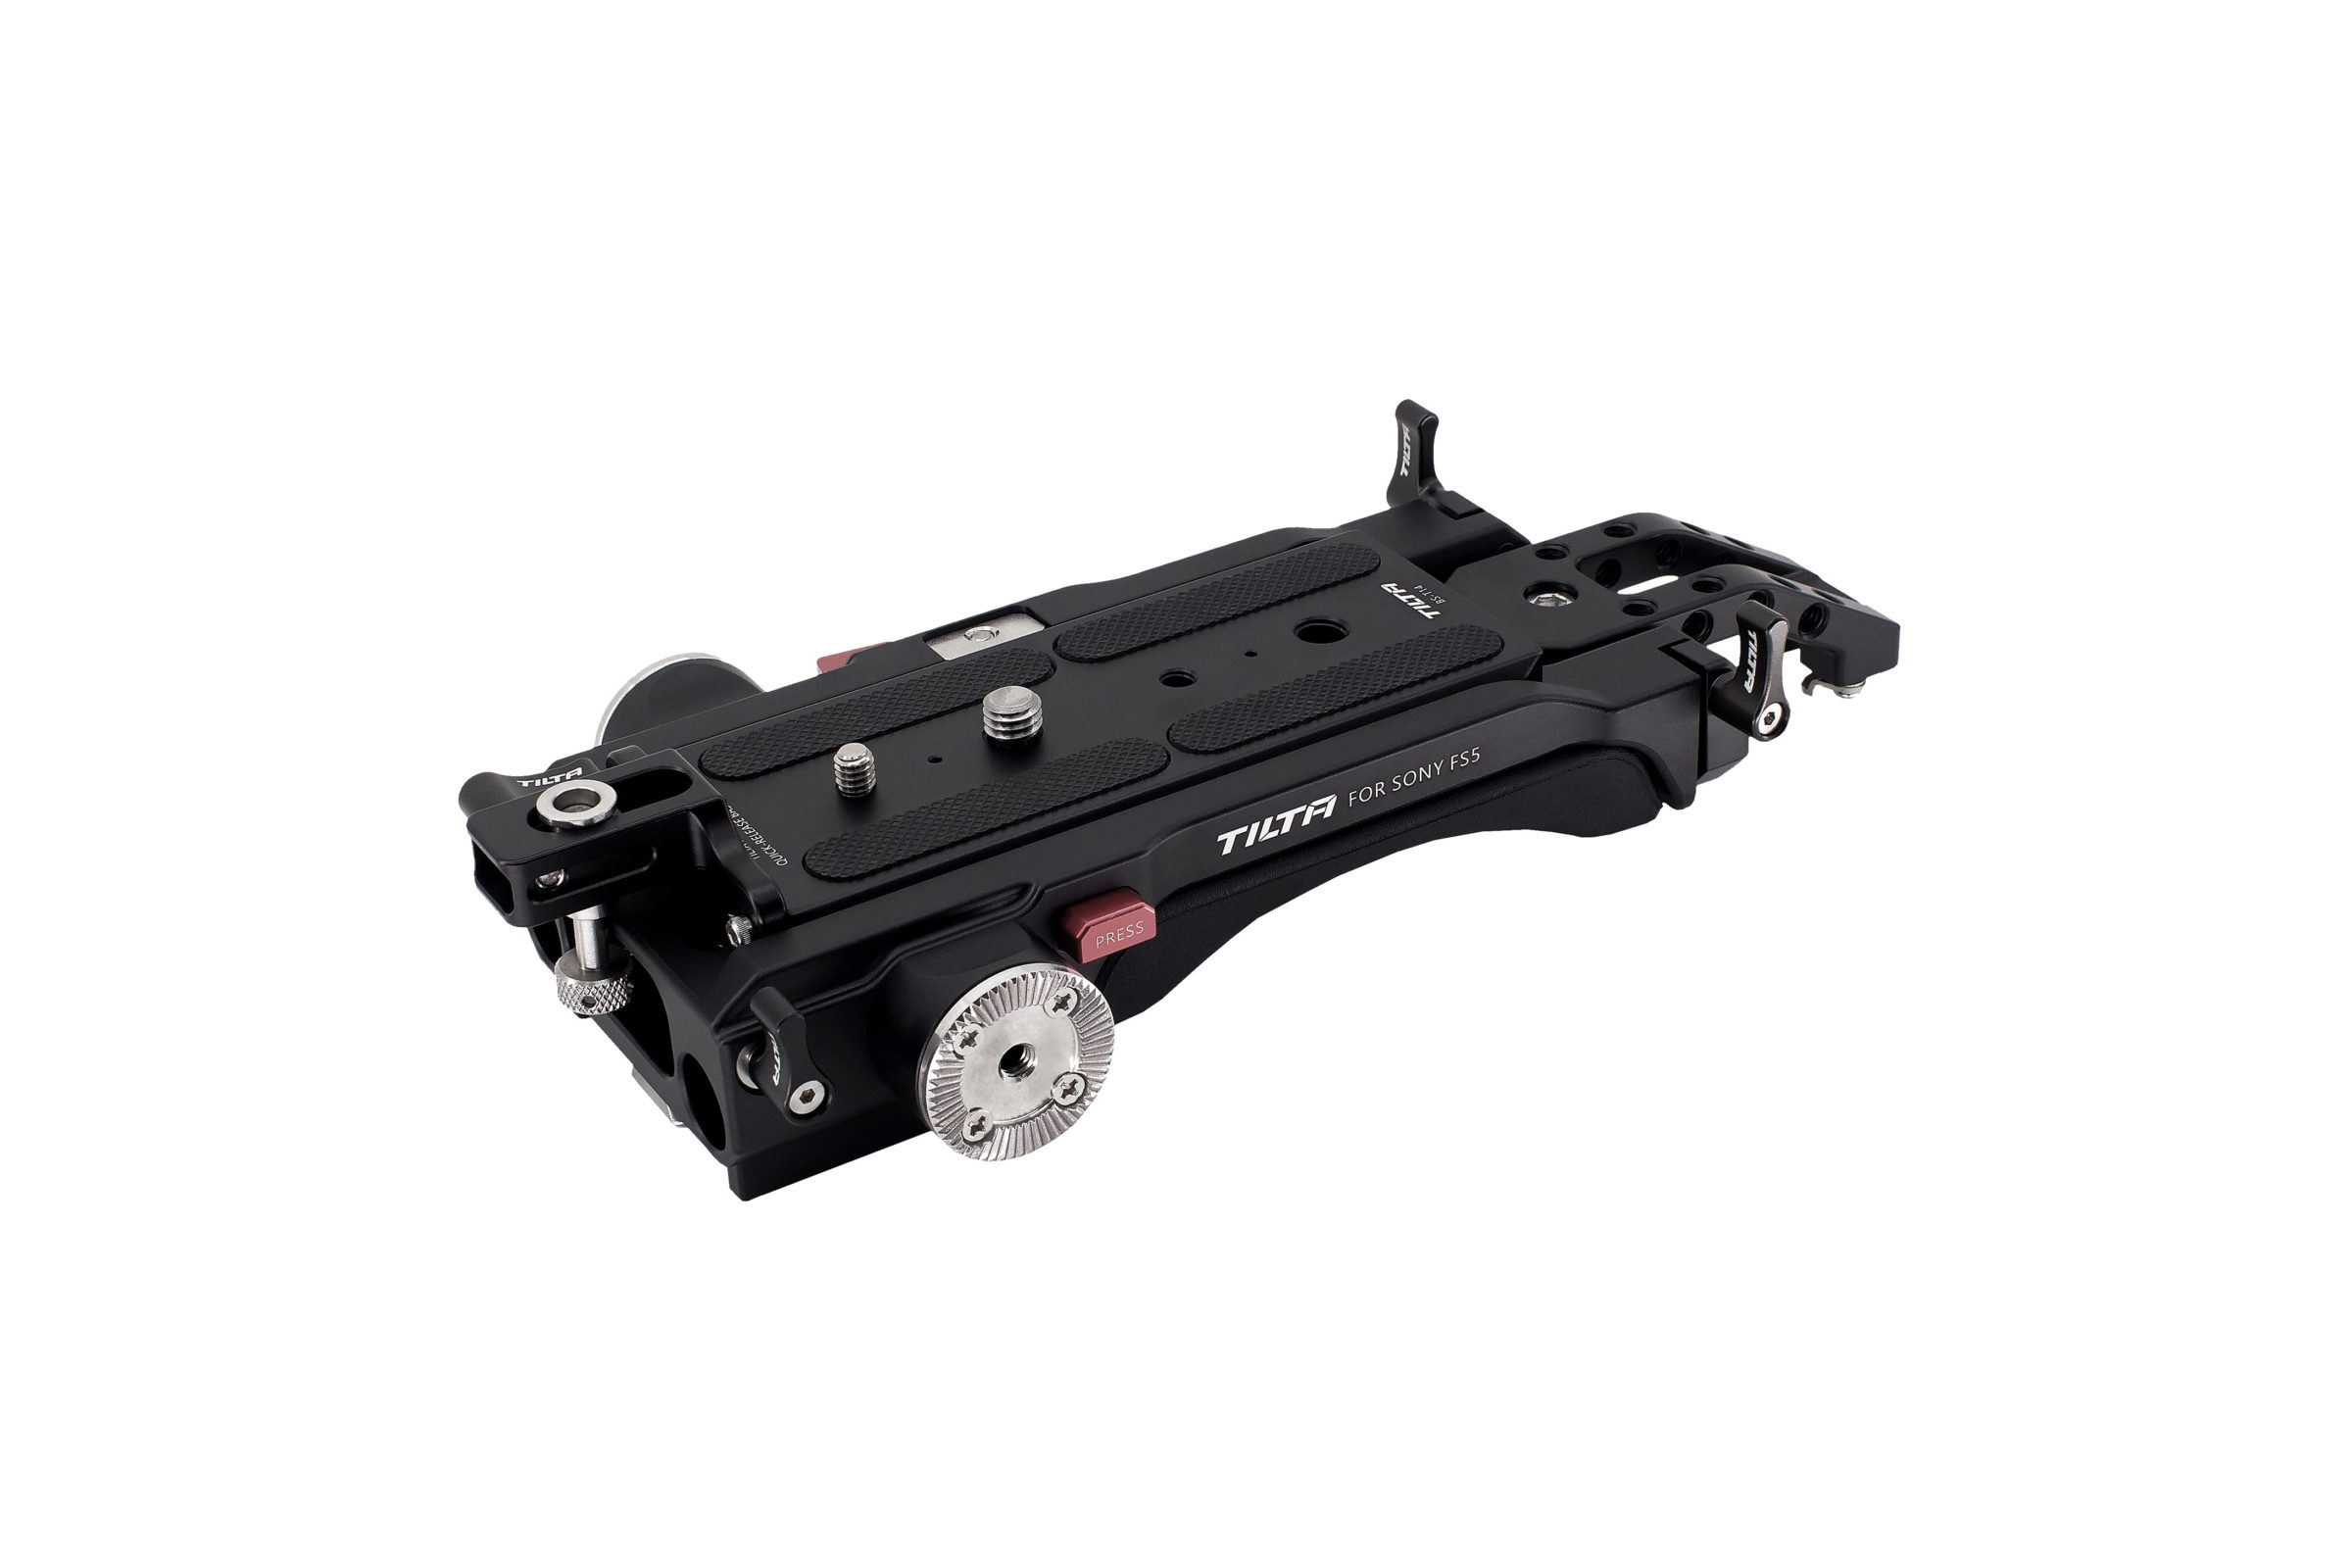 15mm LWS Quick Release Baseplate for Sony FS5